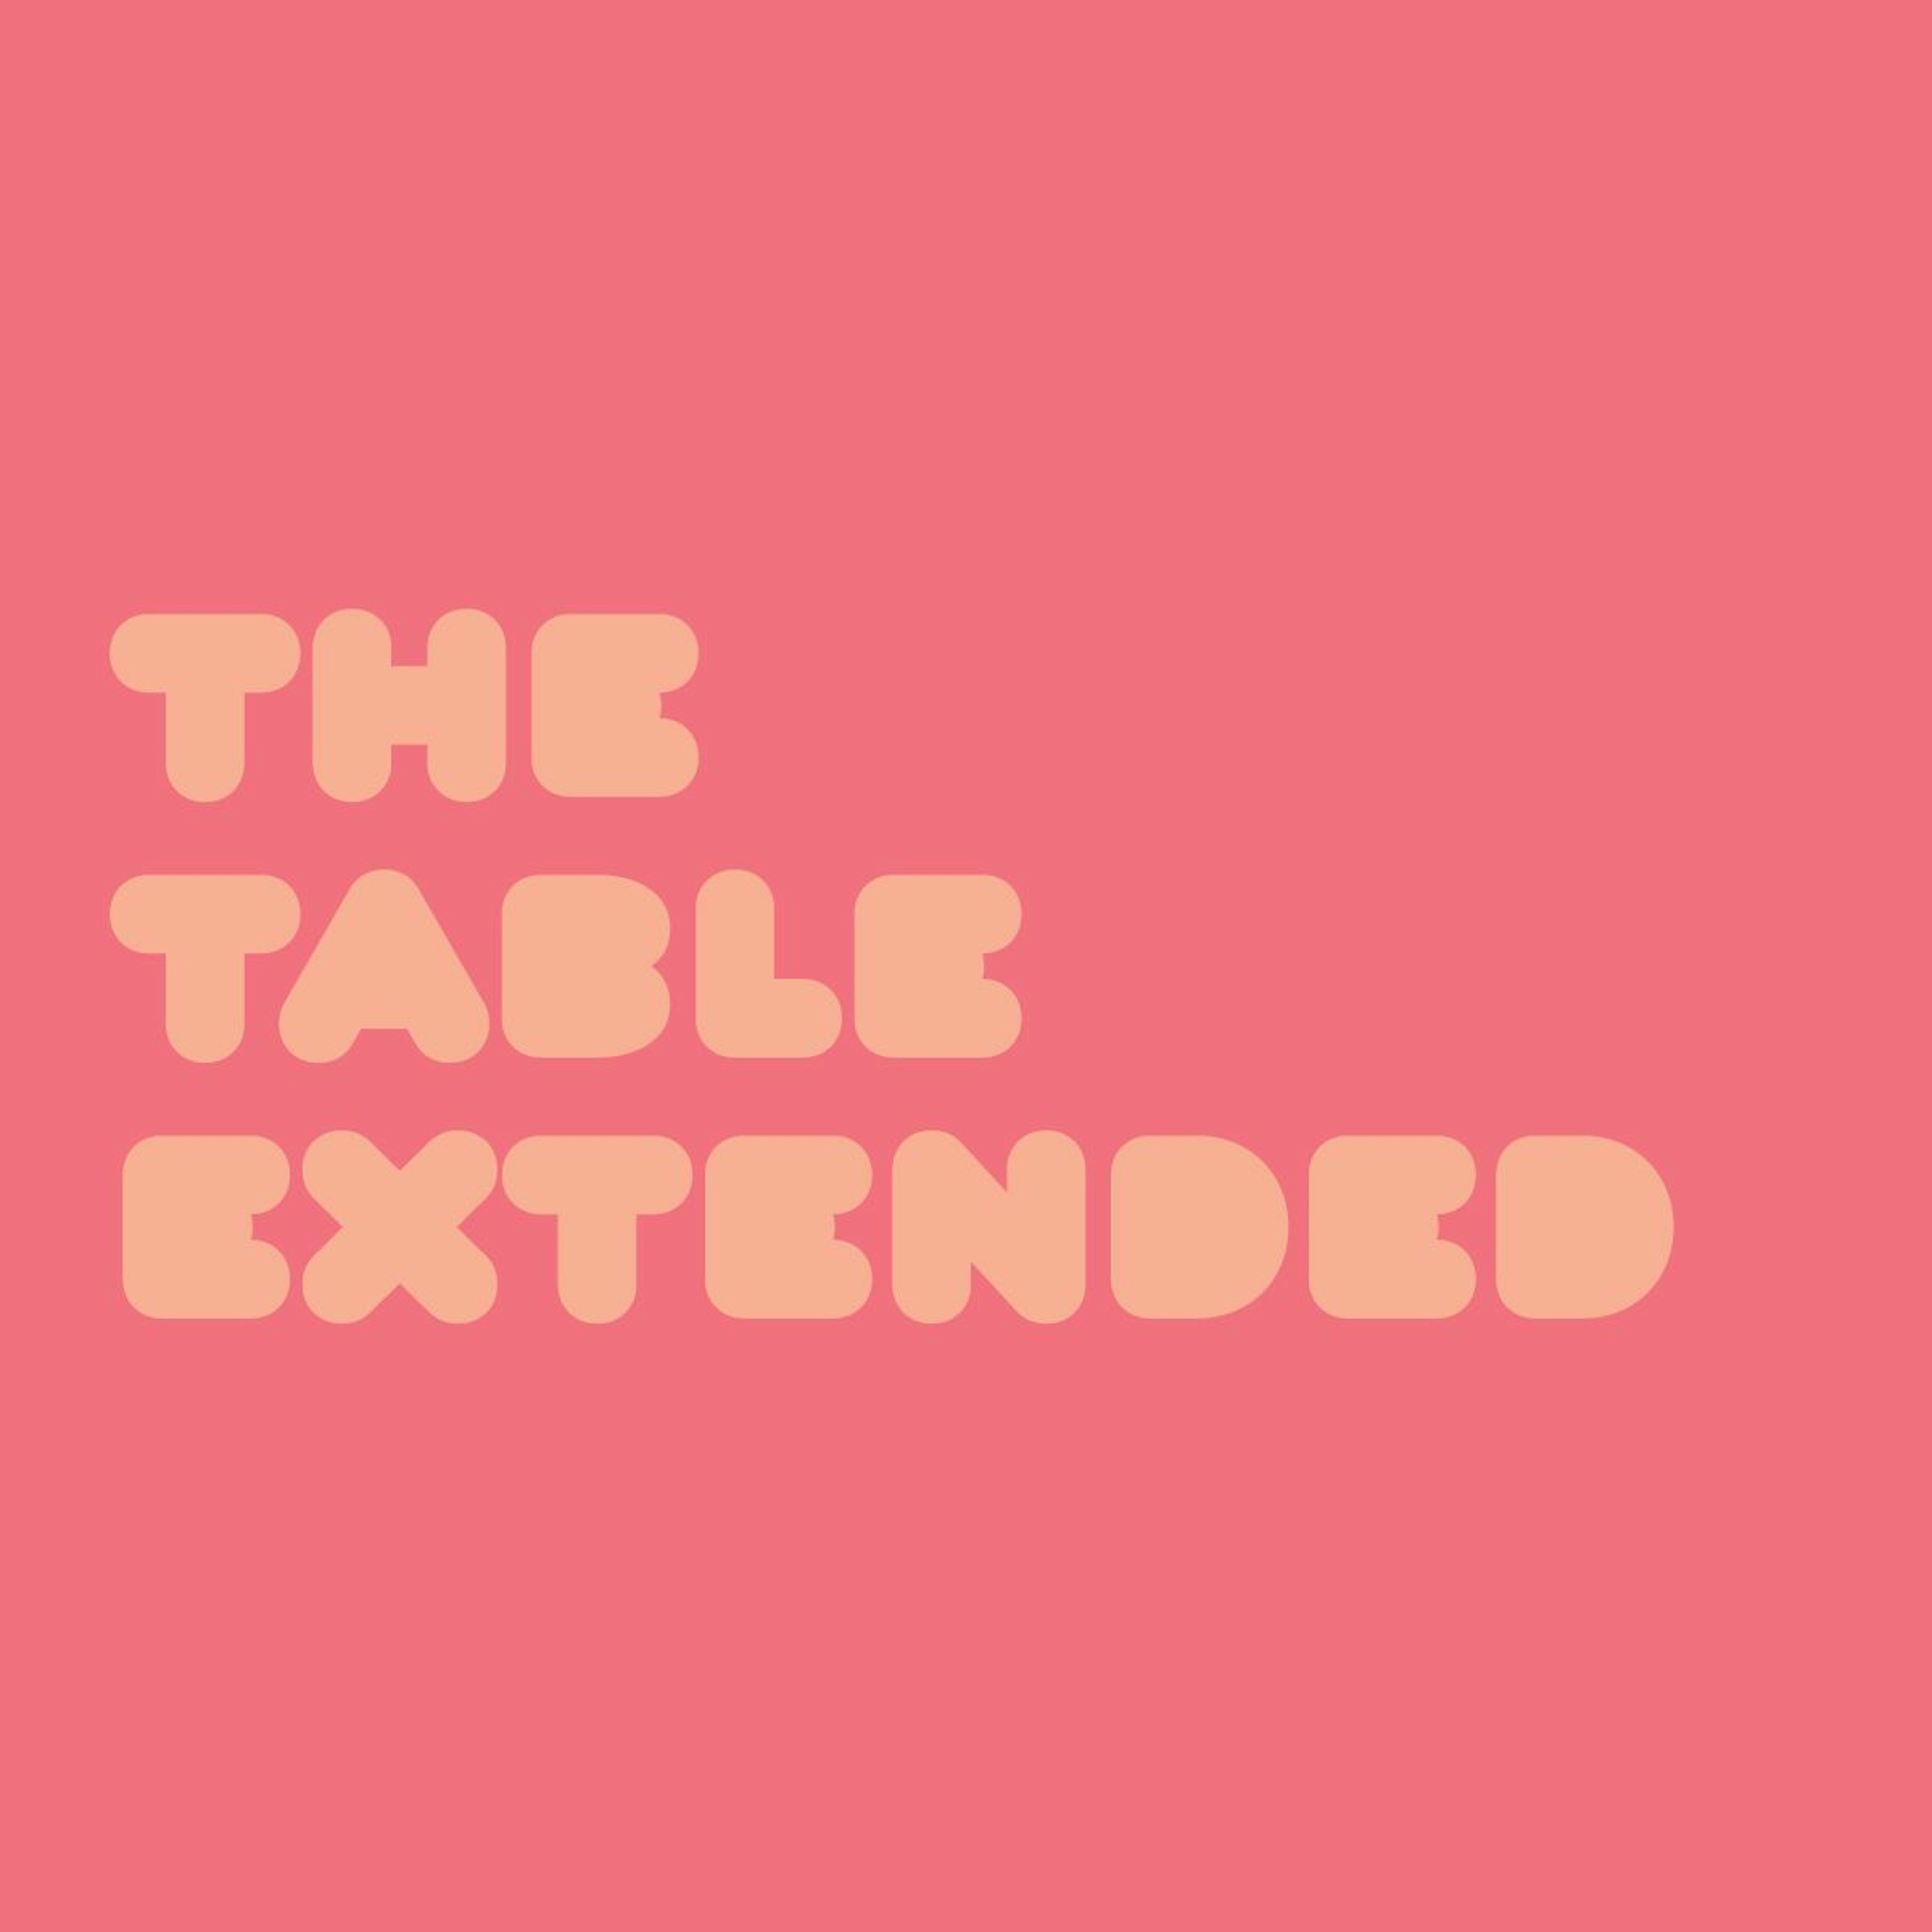 ’The Table Extended’ / Neil Dawson